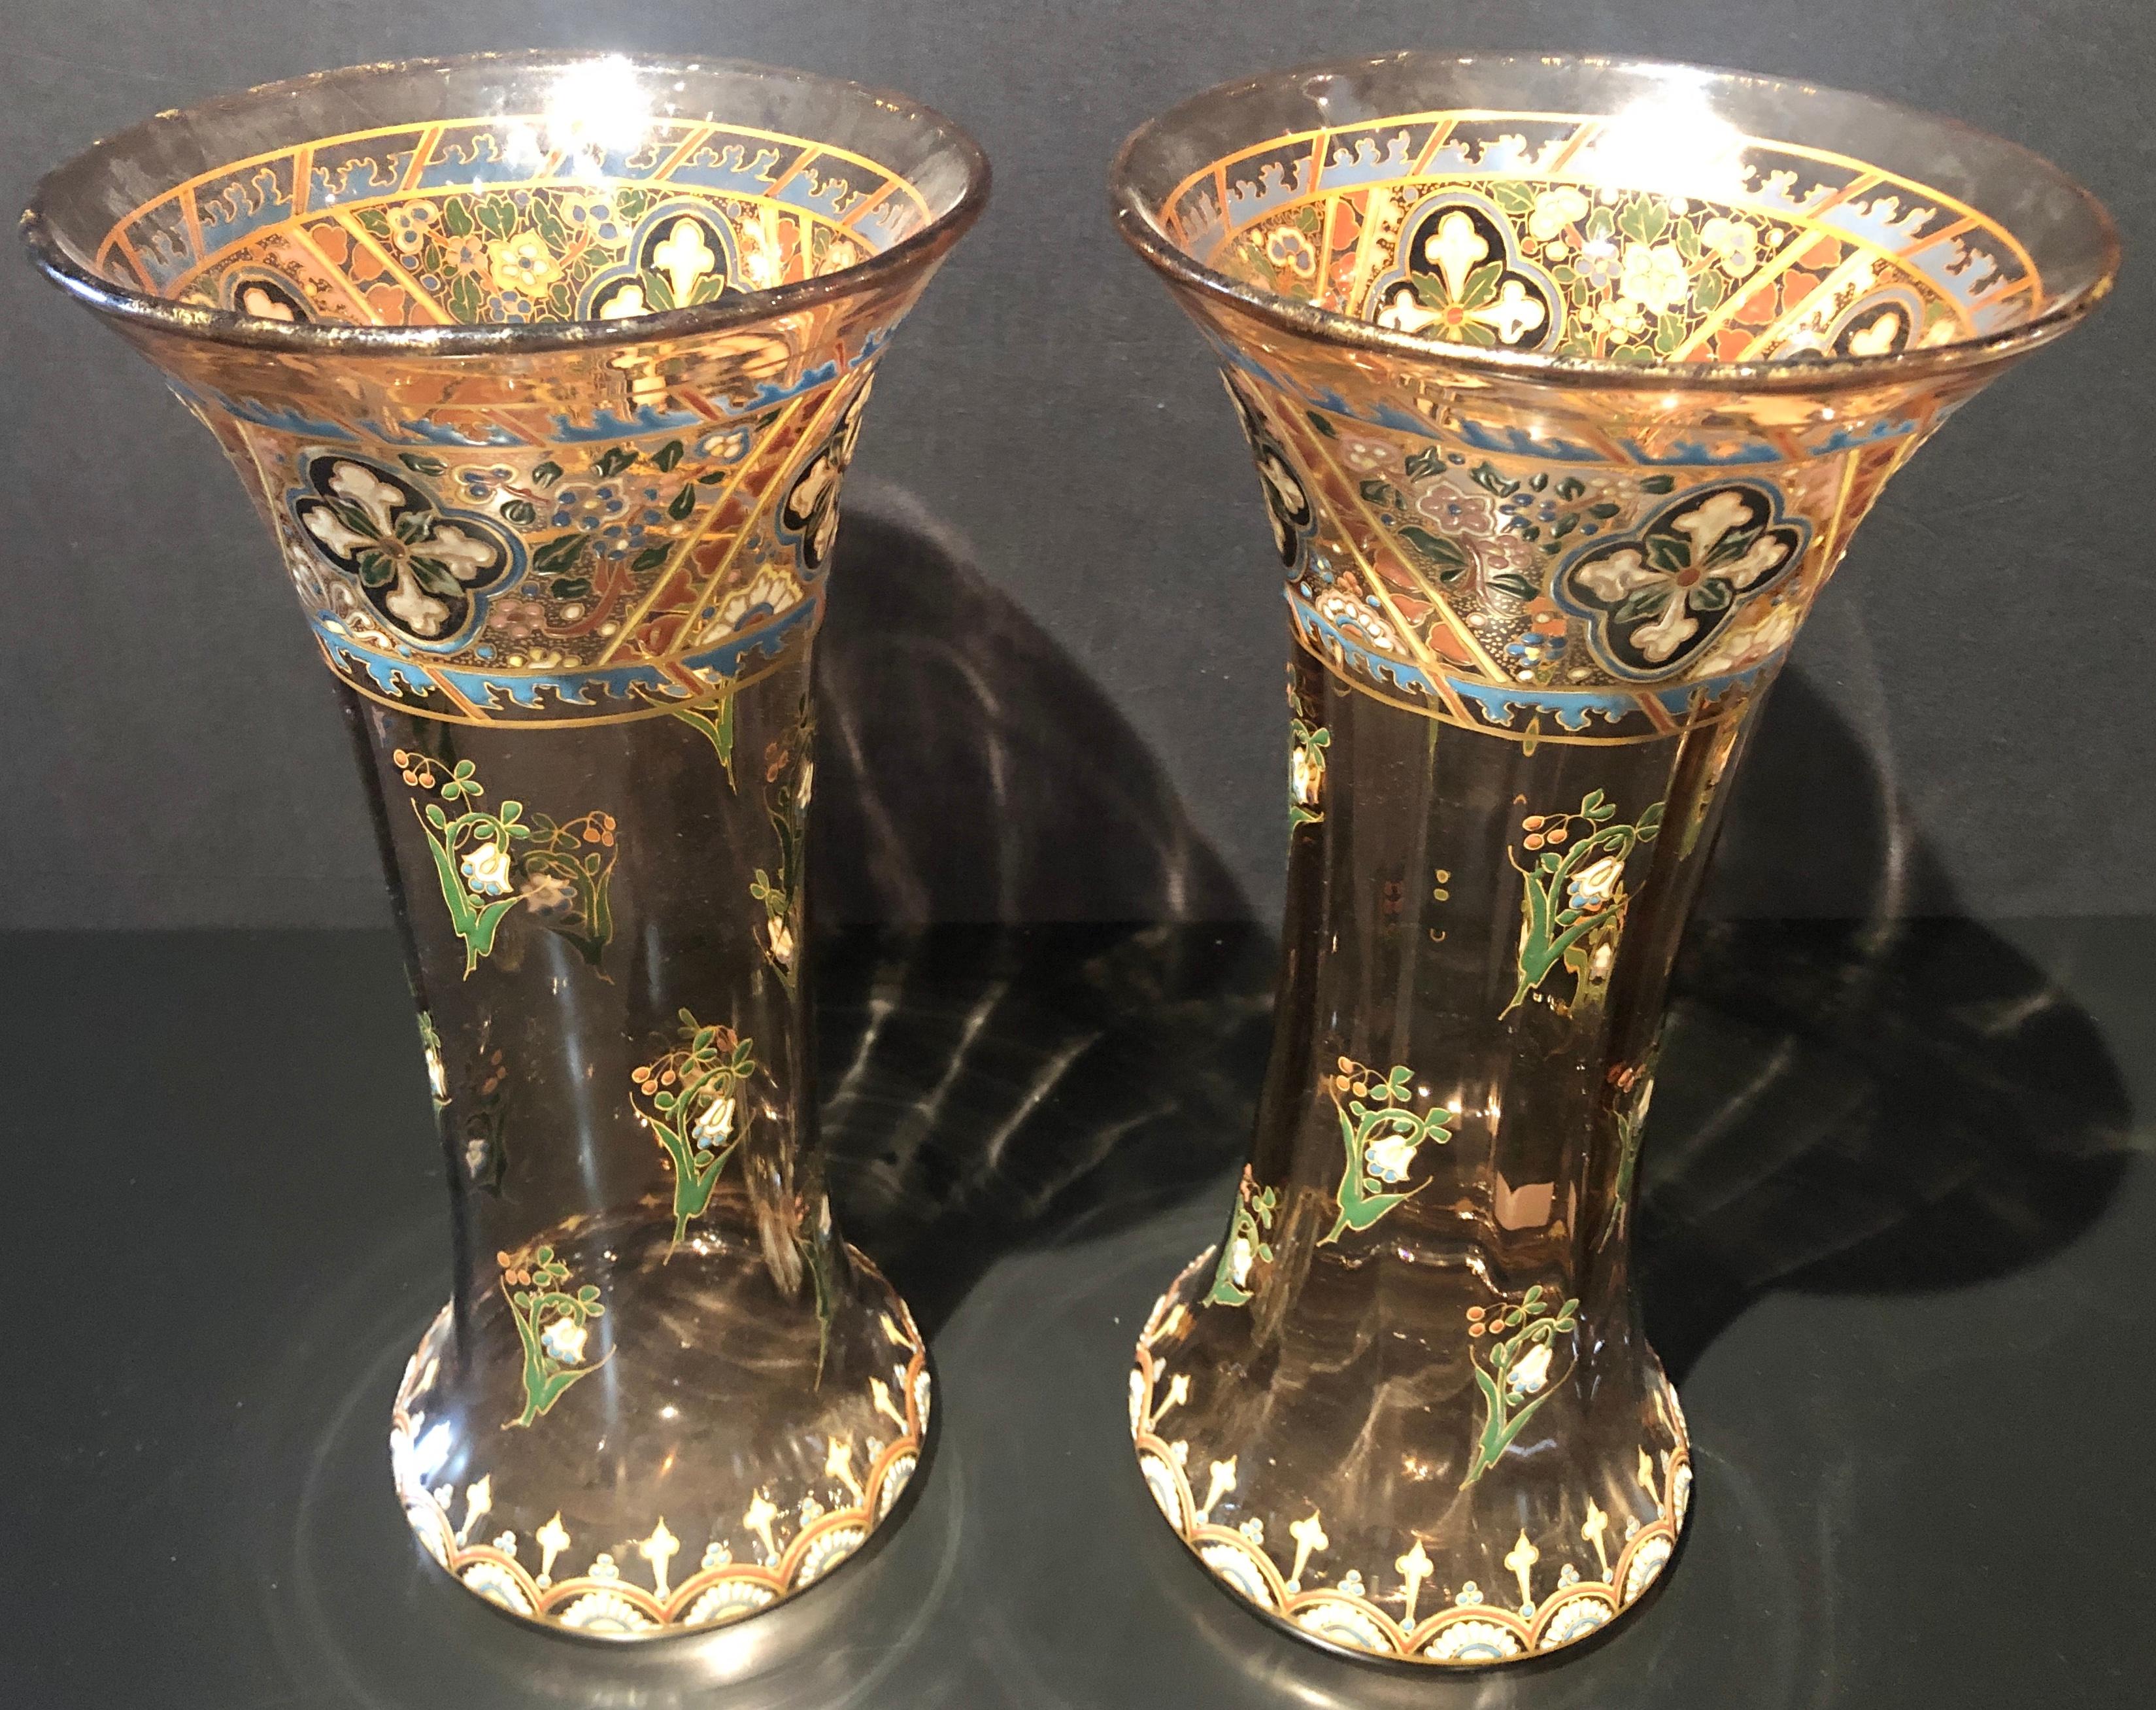 Pair of Emile Galle style antique Palatial French jeweled vases. Simply the finest floral vases one could possibly hope to fine. The overall amber glass having jeweled work depicting colorful raised floral and decorative design. Unsigned.